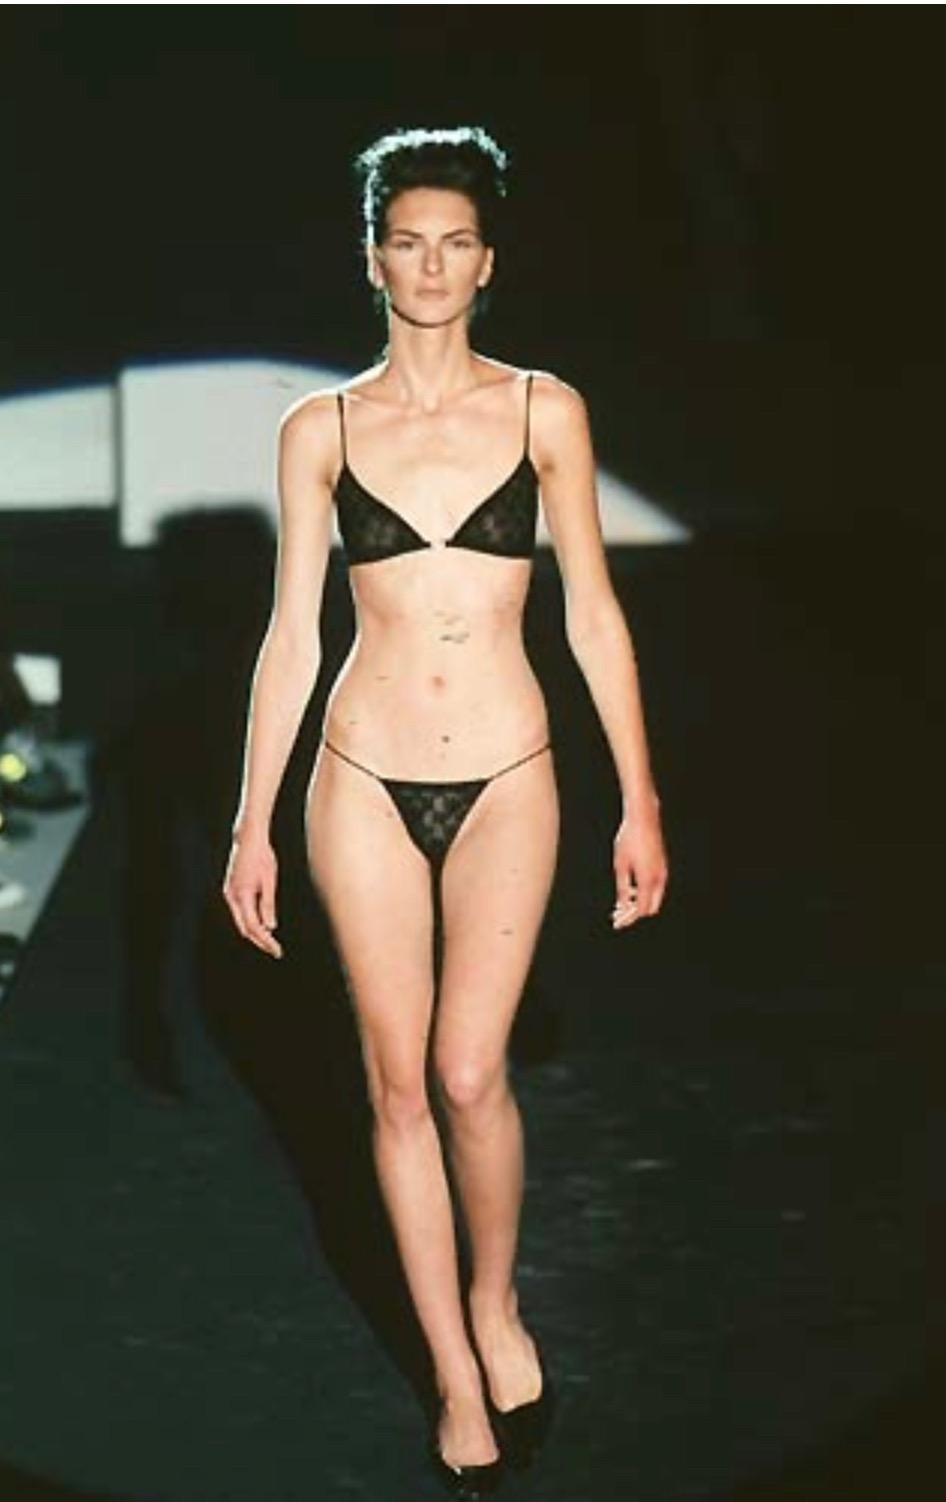 Presenting a fabulous black sheer Gucci 'GG' logo bra, designed by Tom Ford. From the Spring/Summer 1998 collection, this stunning bralette debuted on the season's runway and has since been seen on Kim Kardashian. This sheer bra is made complete